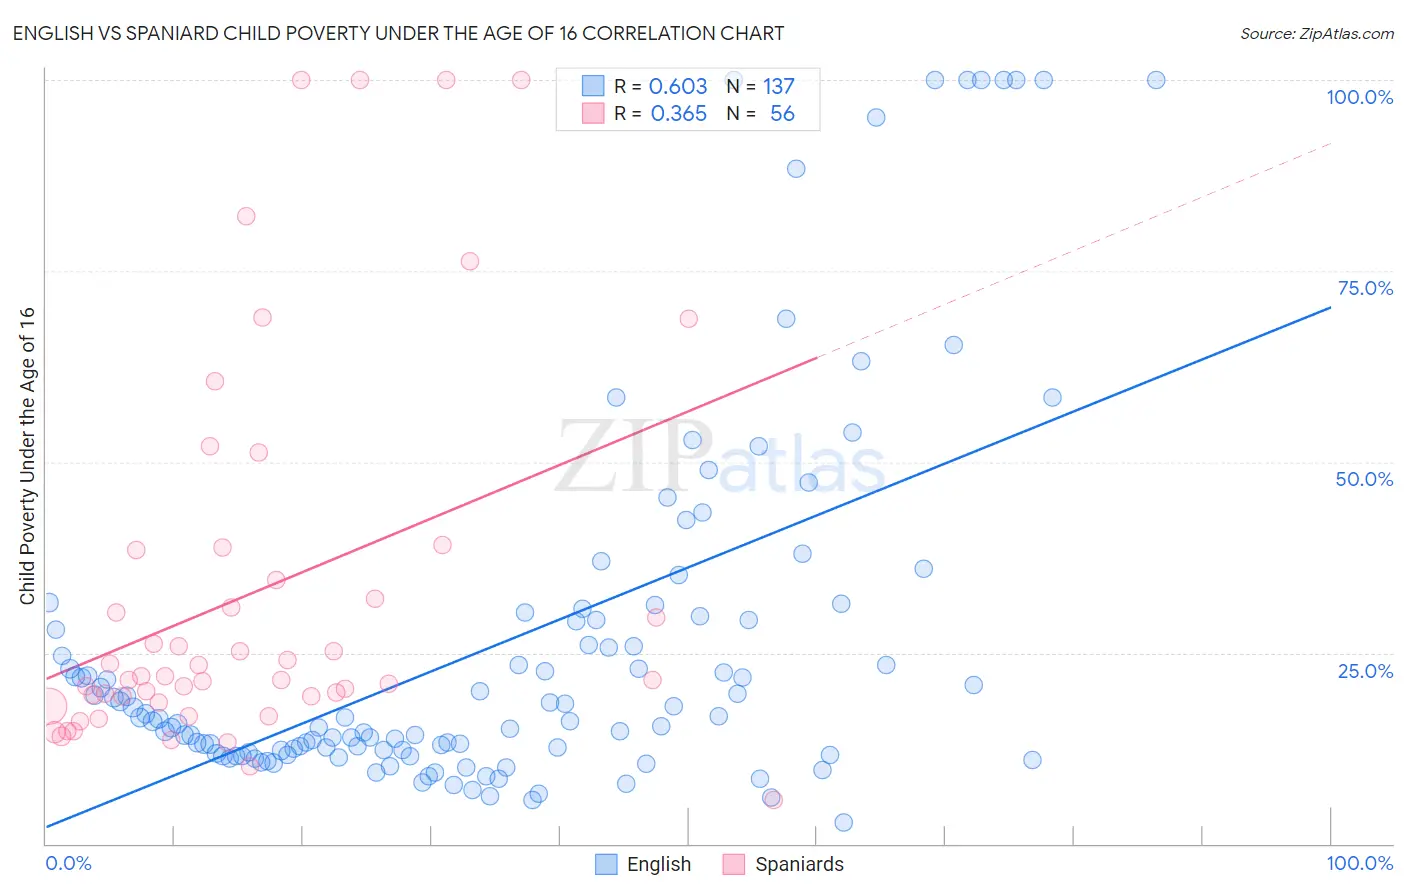 English vs Spaniard Child Poverty Under the Age of 16